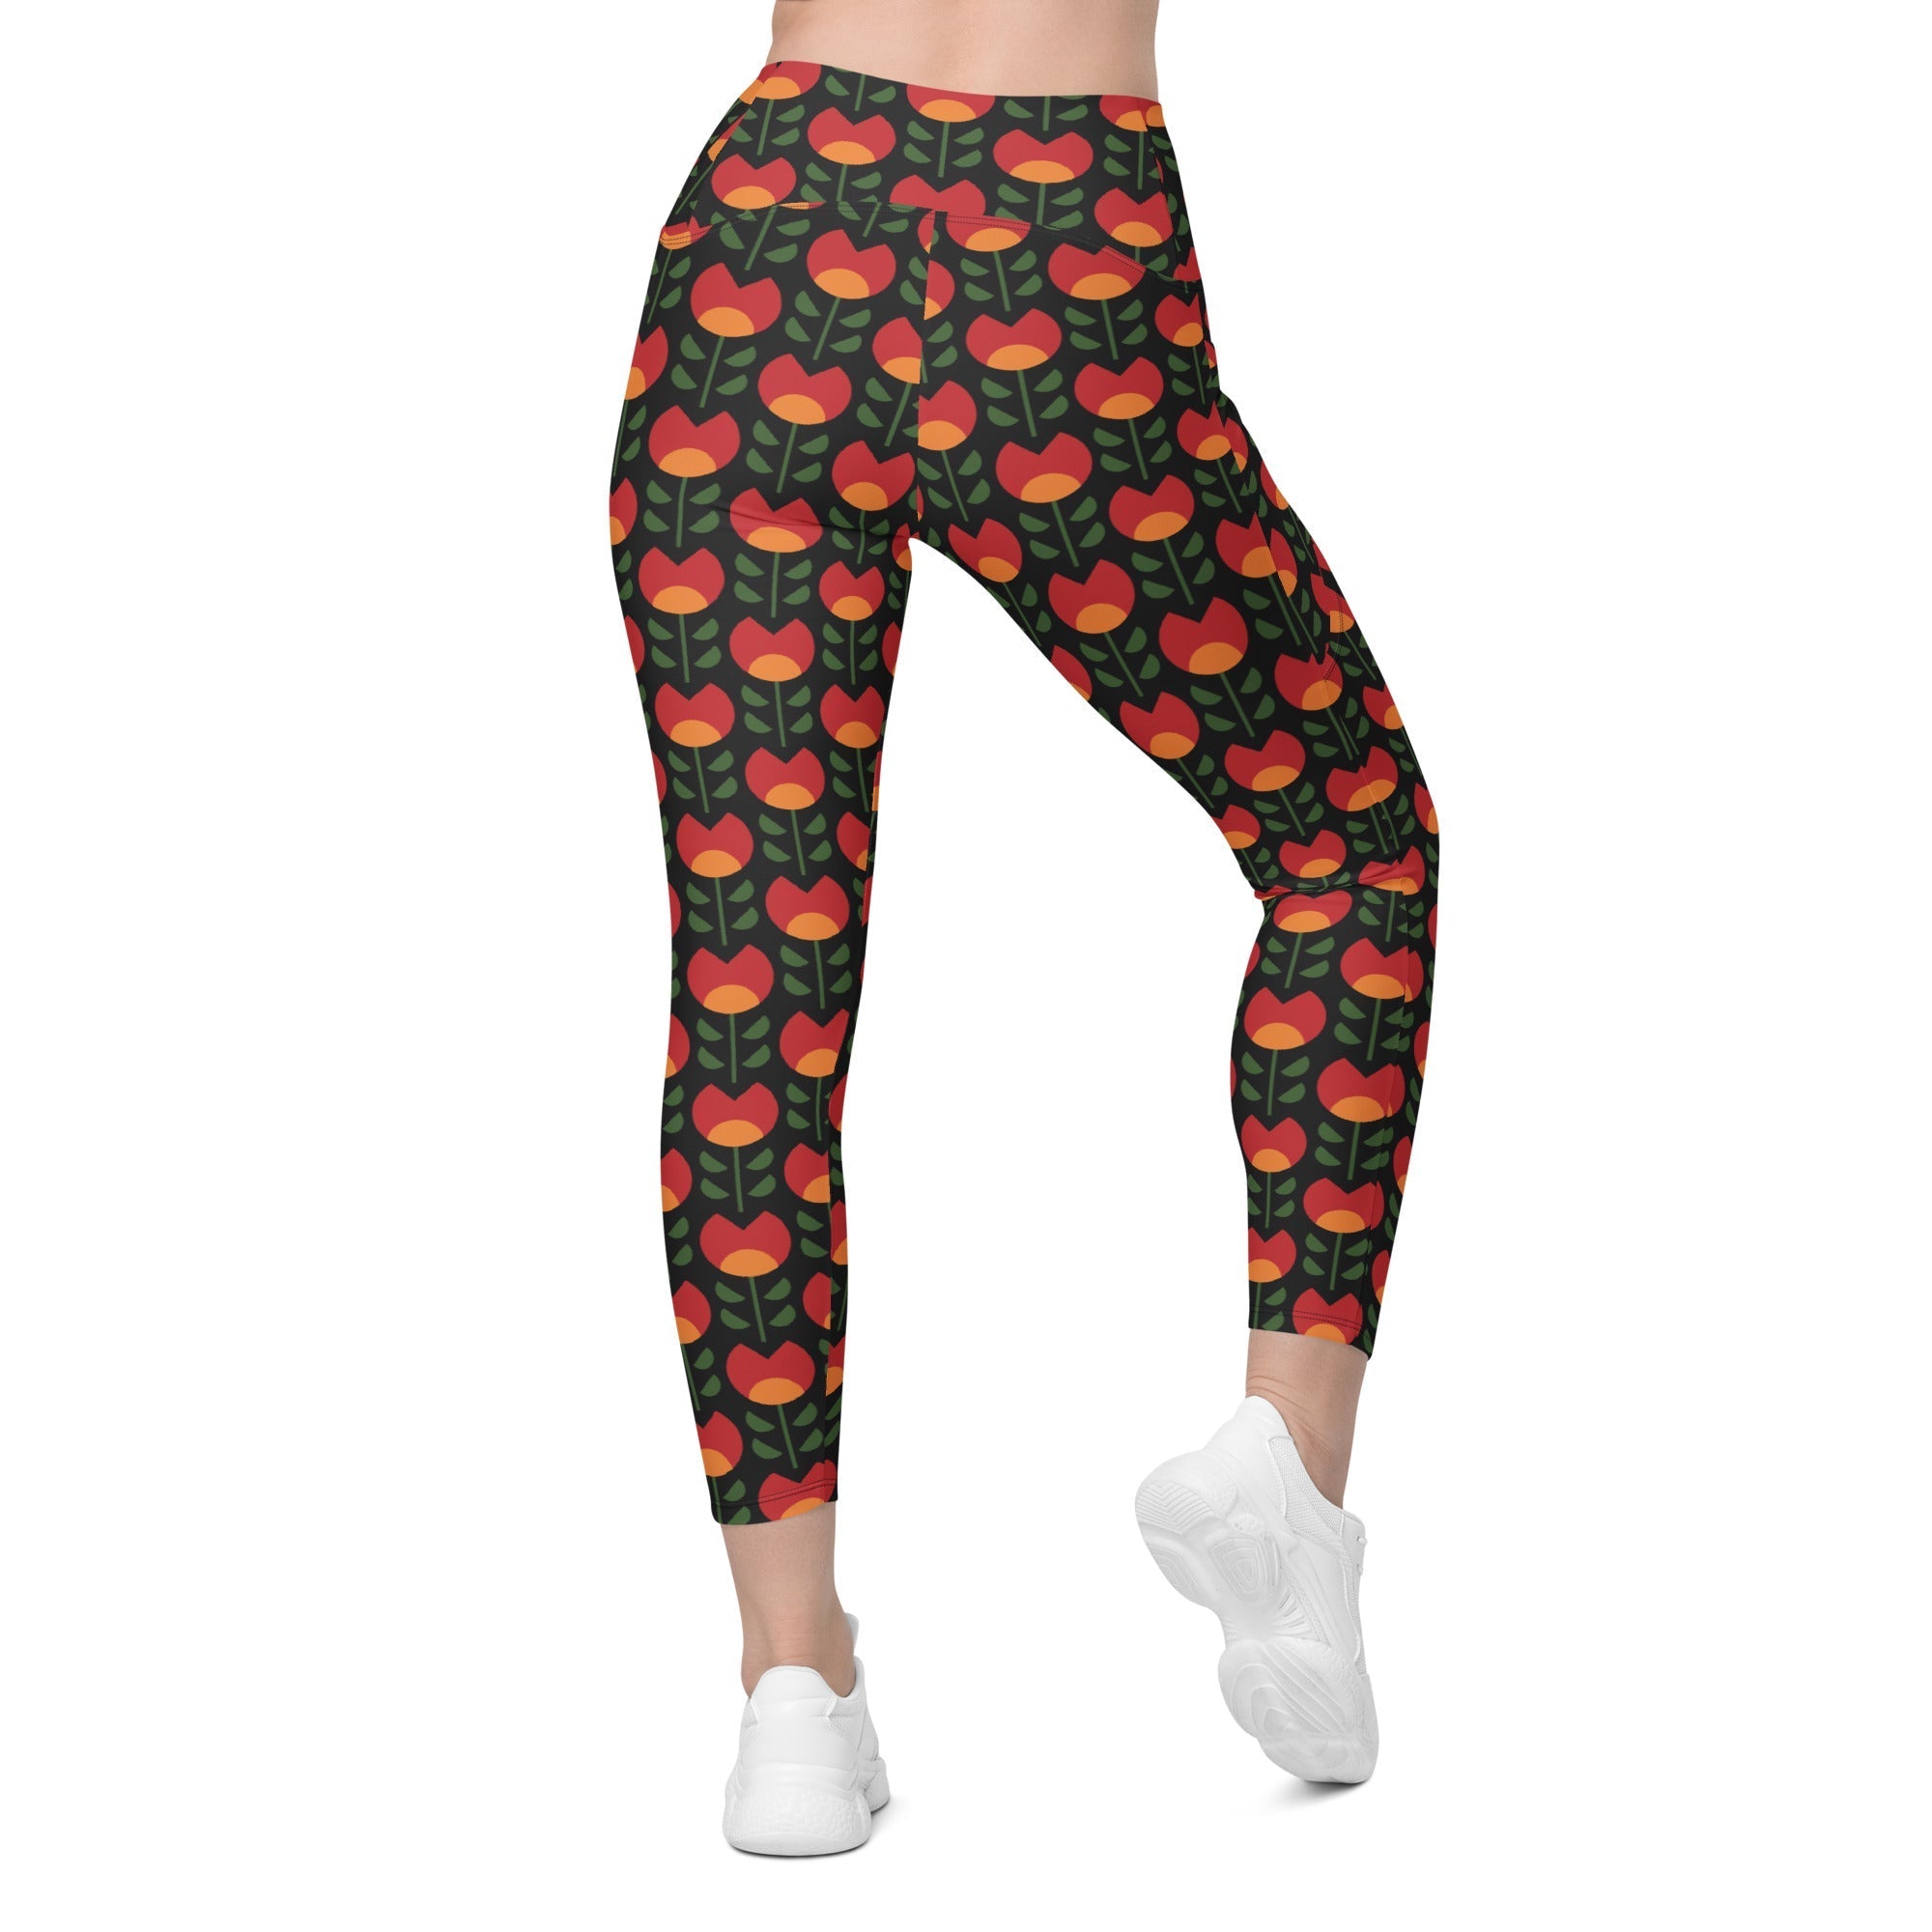 Black History Month Crossover Leggings With Pockets